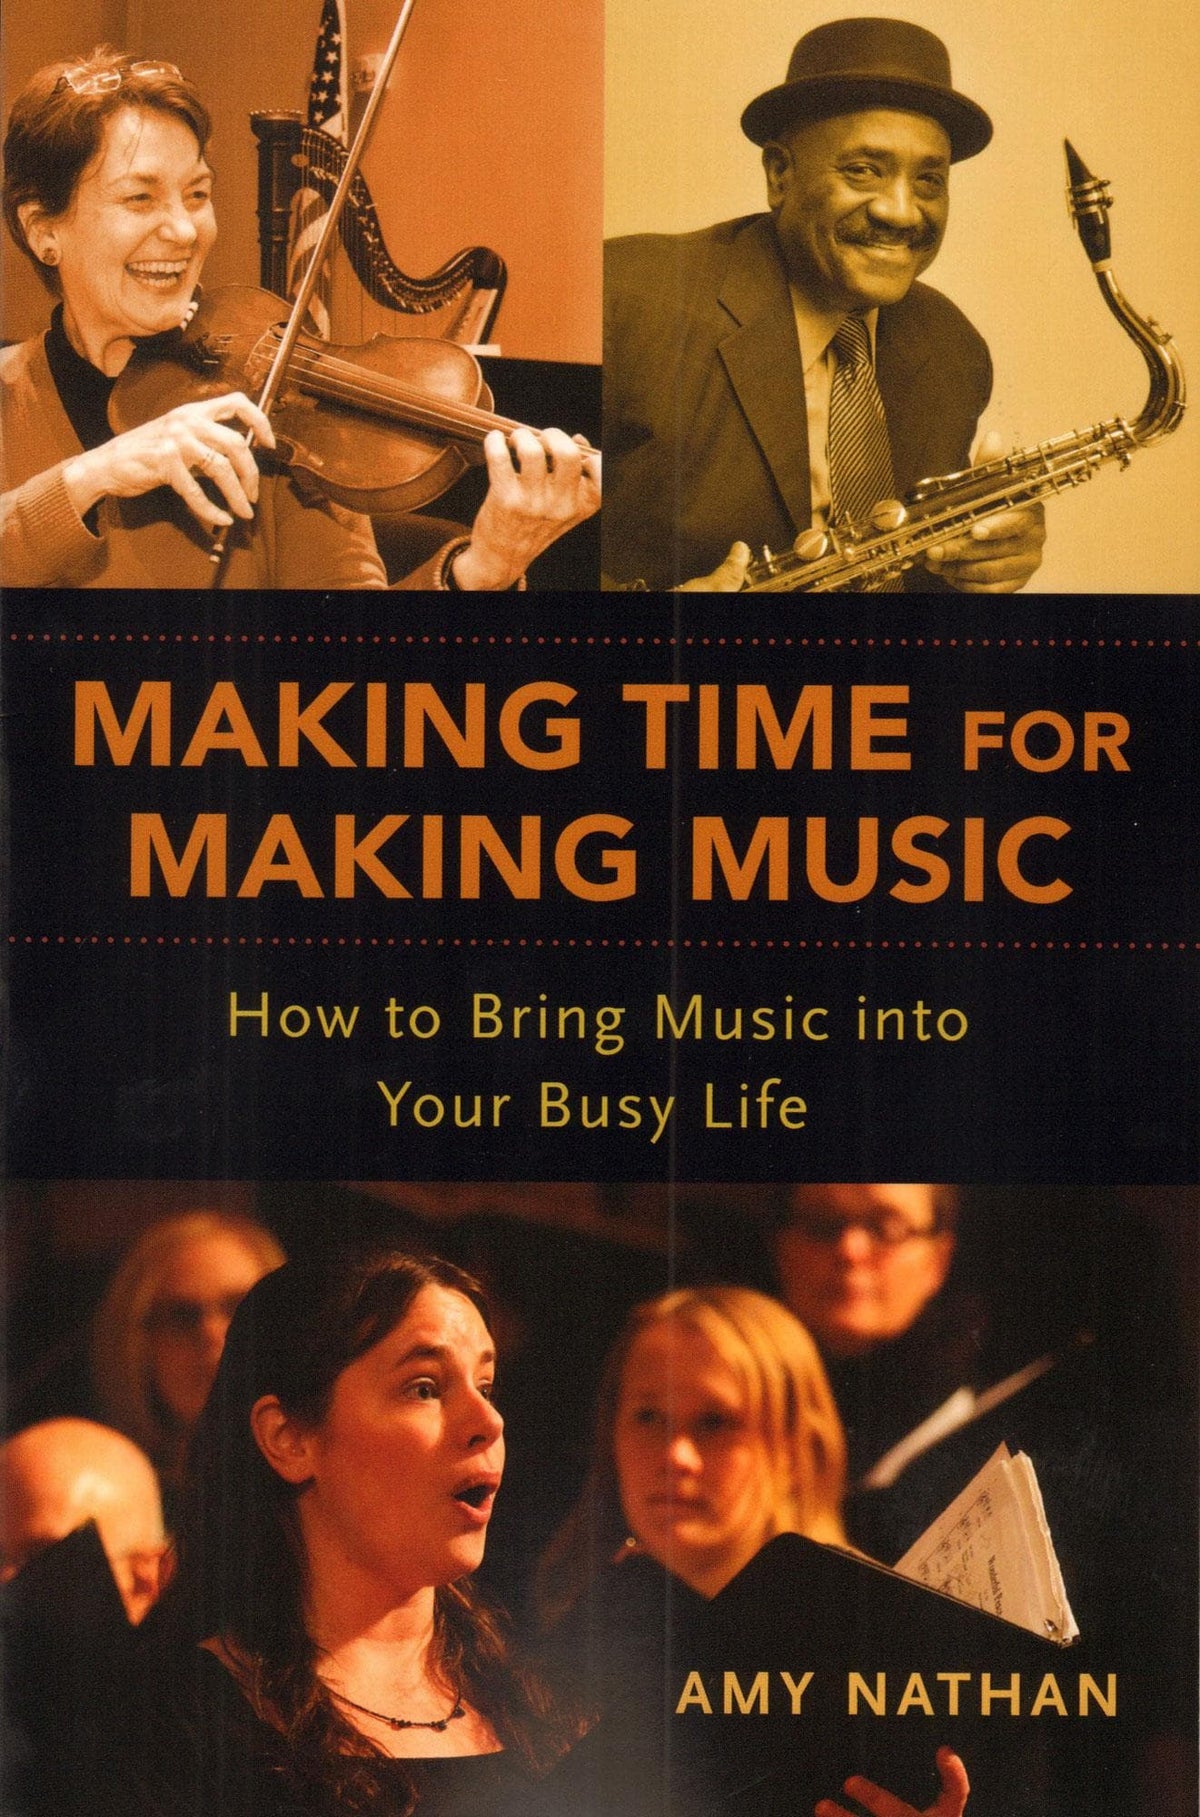 Making Time For Making Music by Amy Nathan